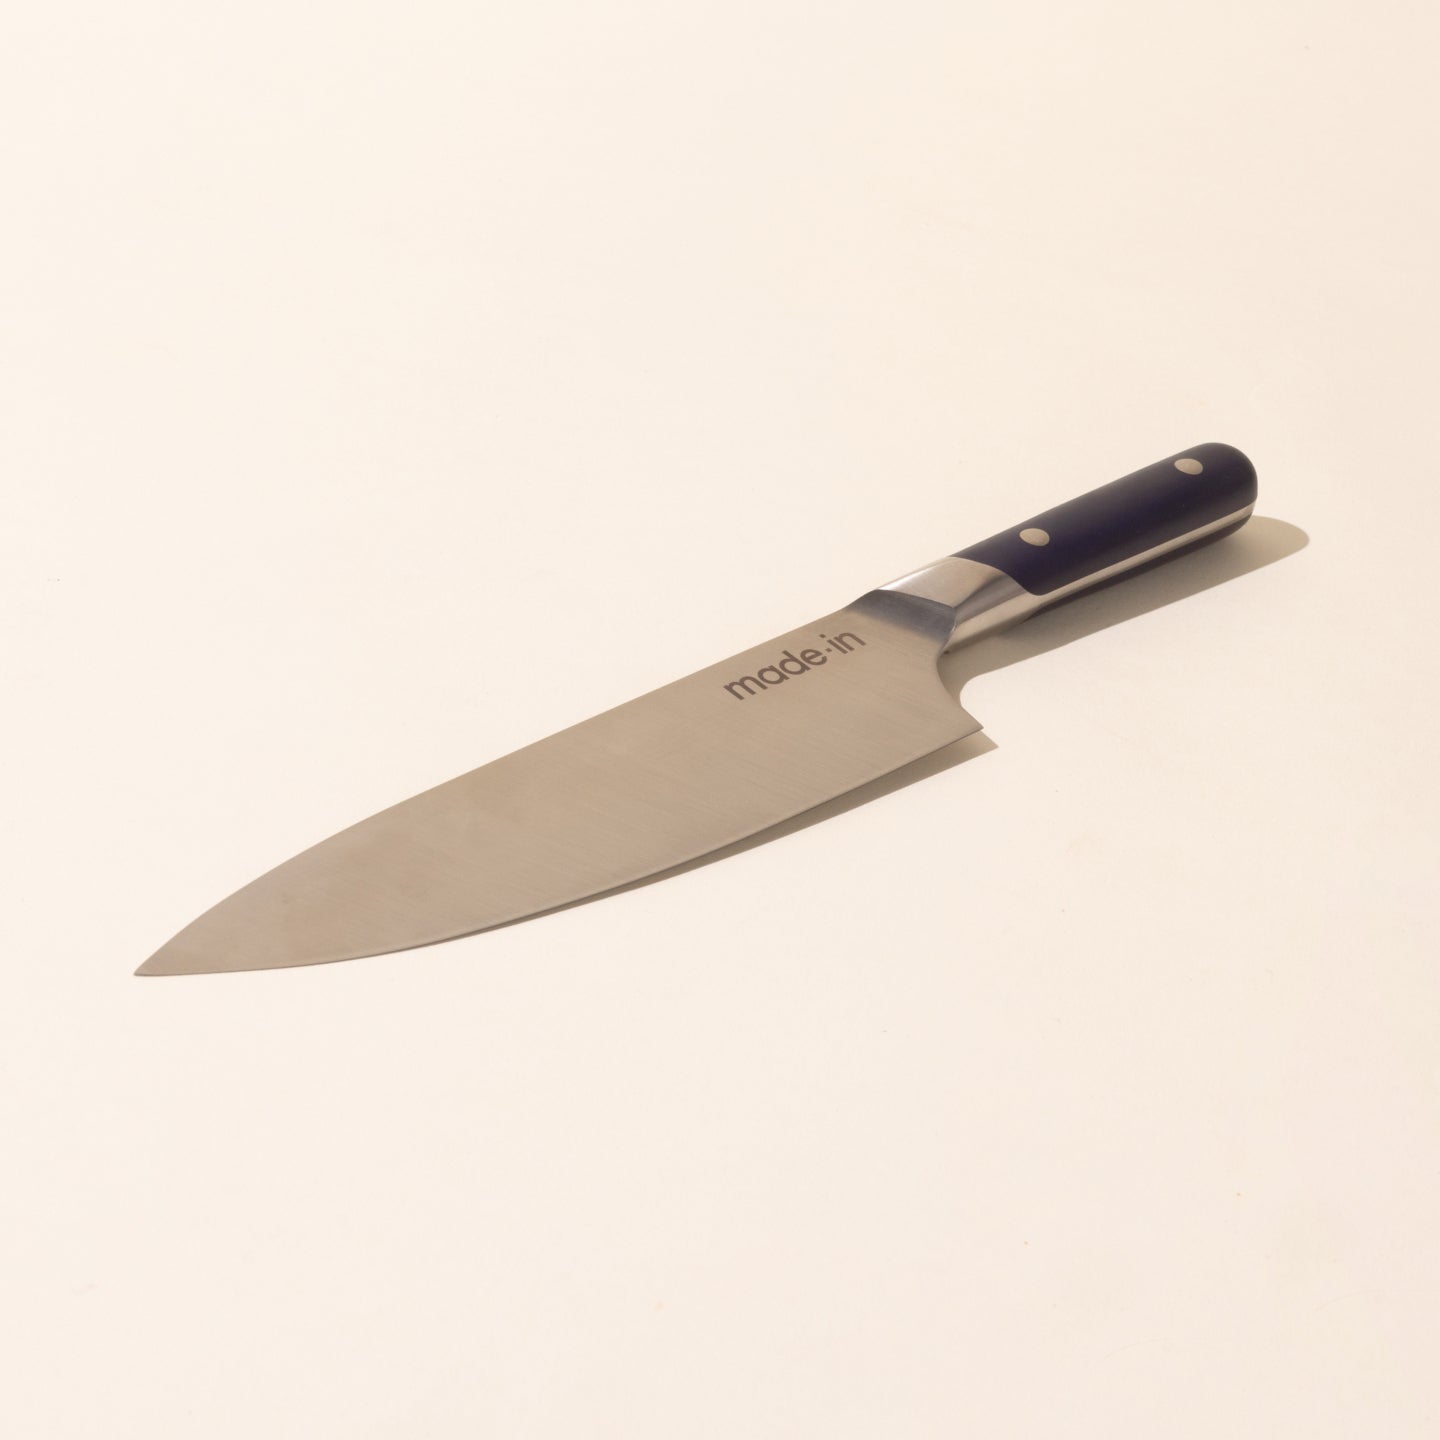 https://cdn.shopify.com/s/files/1/2131/5111/products/Web_P1_Knife_Chef_8in_HarborBlue_1x1_Hero.jpg?v=1698864593